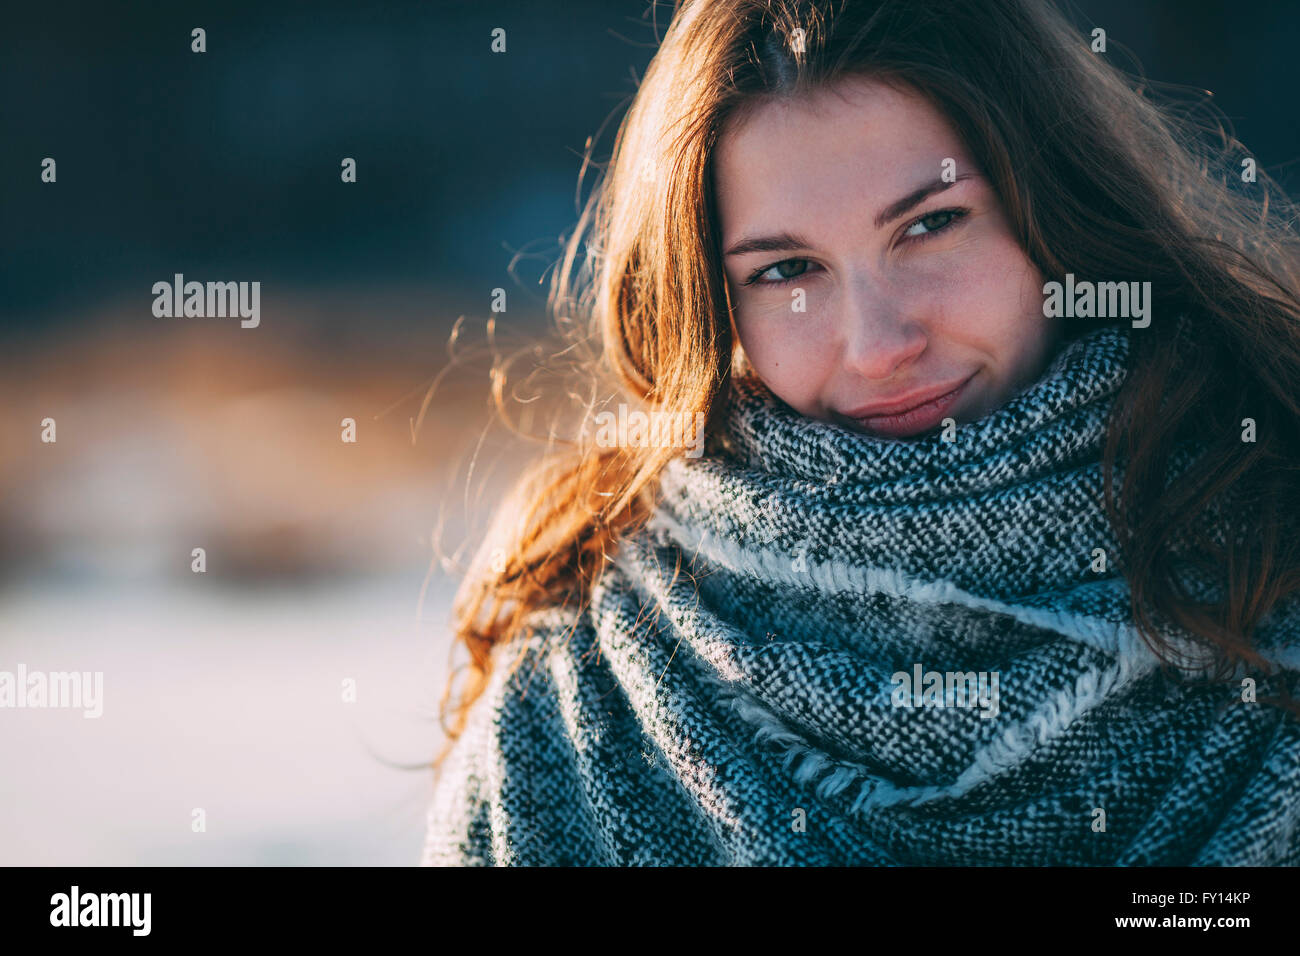 Close-up portrait of young beautiful woman during winter Stock Photo